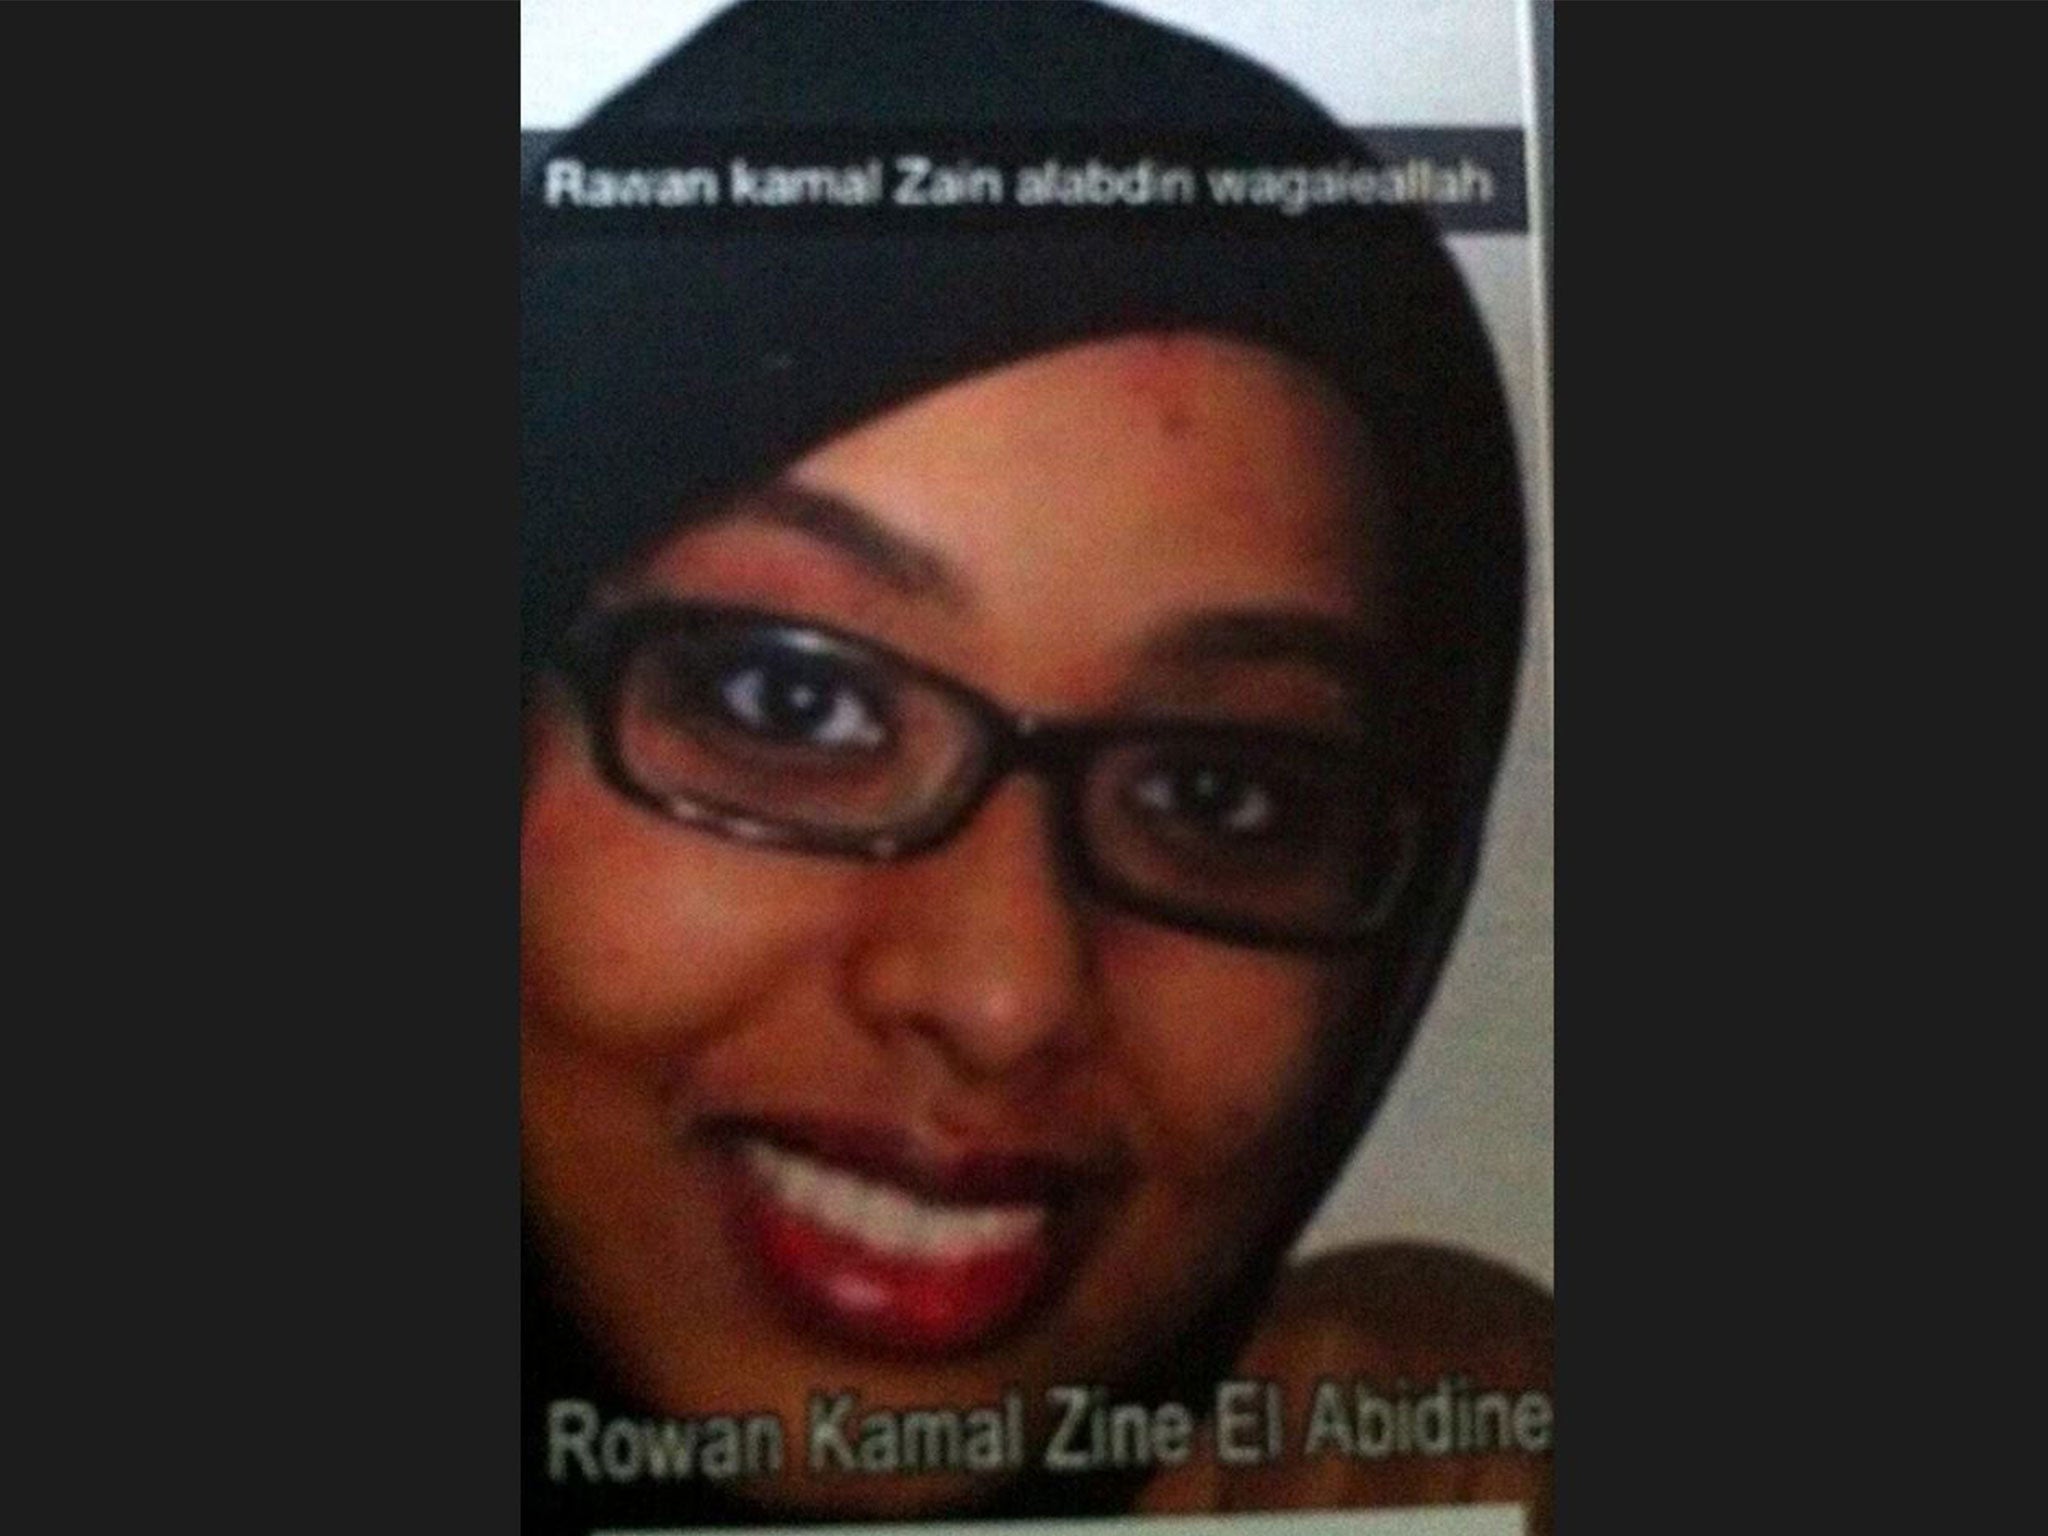 Rowan Kamal Zine El Abidine, 22, was one of nine medical students who left their university to join Isis in 2015